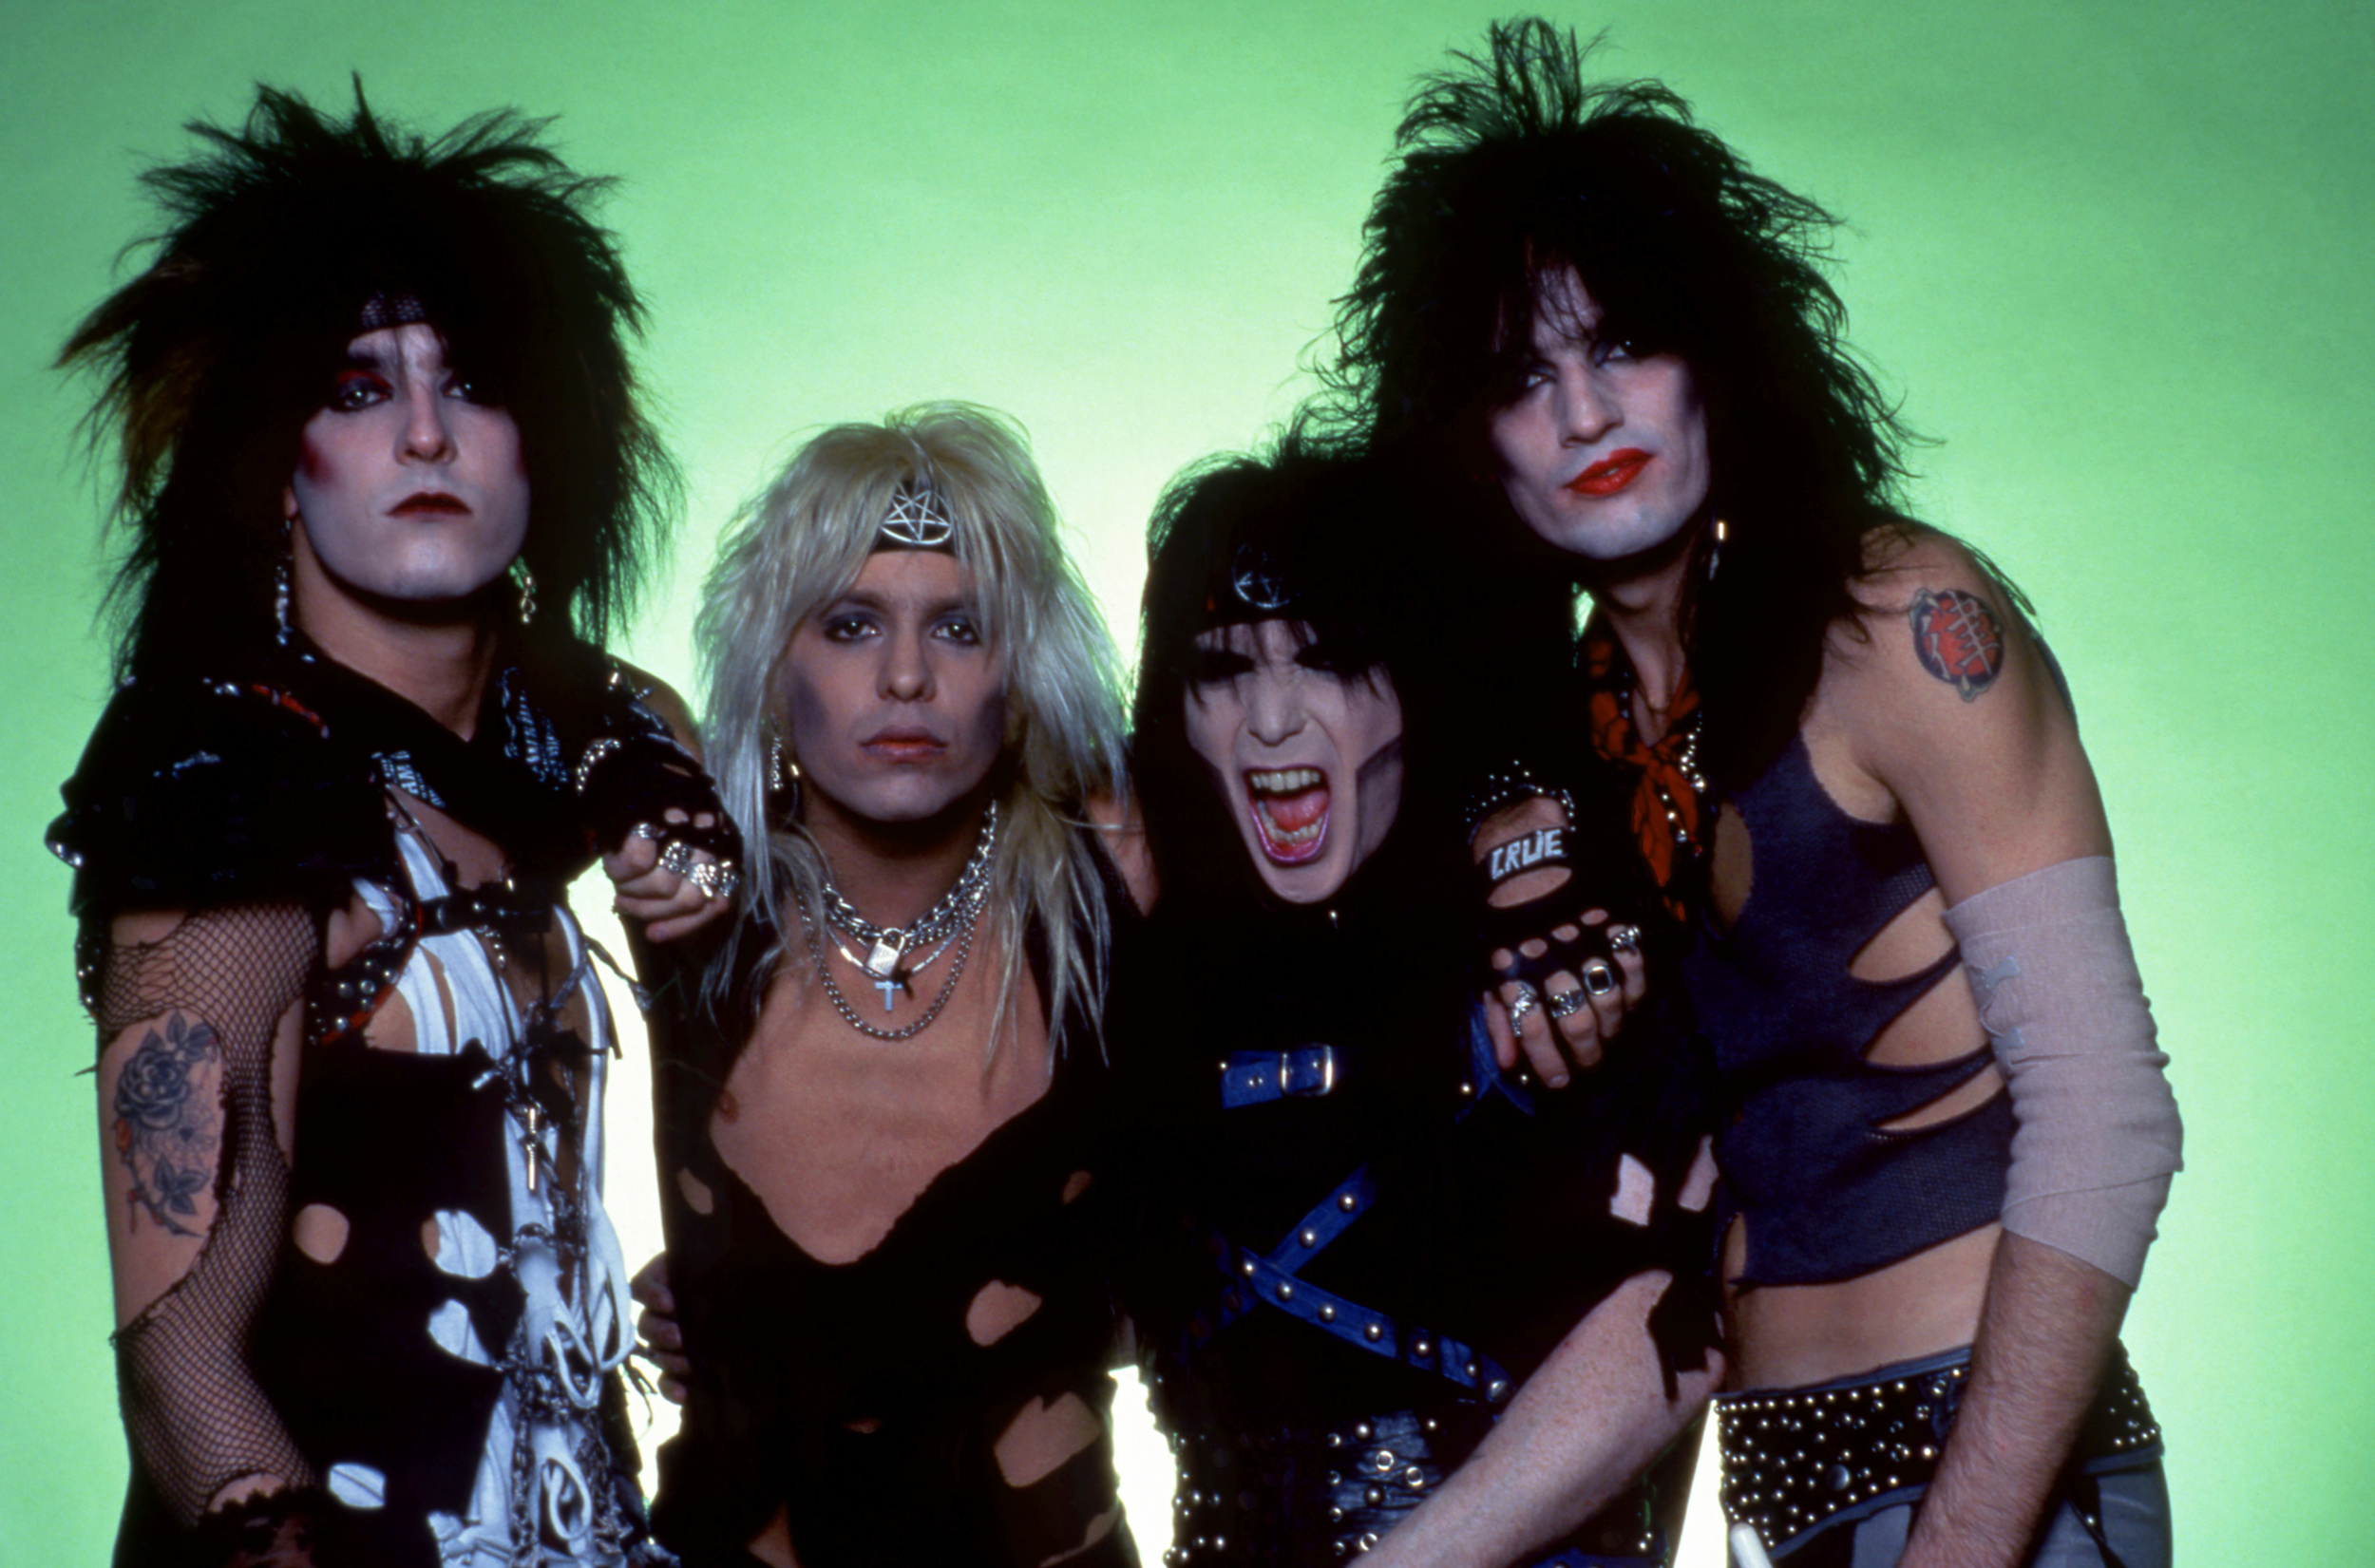 <p>Mötley Crüe was like the Madonna of the hair/glam metal scene, consistently reinventing its look. Leather-clad, New York Dolls wannabes (<em>Too Fast for Love</em>, 1981), Satan worshipers (<em>Shout at the Devil</em>, 1983), hair rockers (<em>Theatre of Pain</em>, 1985), and bikers (<em>Girls, Girls, Girls</em>, 1987). The Crüe was all about conceptualism and <a href="https://www.youtube.com/watch?v=4Hihge6FFVw" rel="noopener noreferrer">stage presence</a>, and it took it all to the hilt while becoming one of the biggest bands in the world.</p><p>You may also like: <a href='https://www.yardbarker.com/entertainment/articles/the_25_most_memorable_fictional_bands_122723/s1__33296726'>The 25 most memorable fictional bands</a></p>